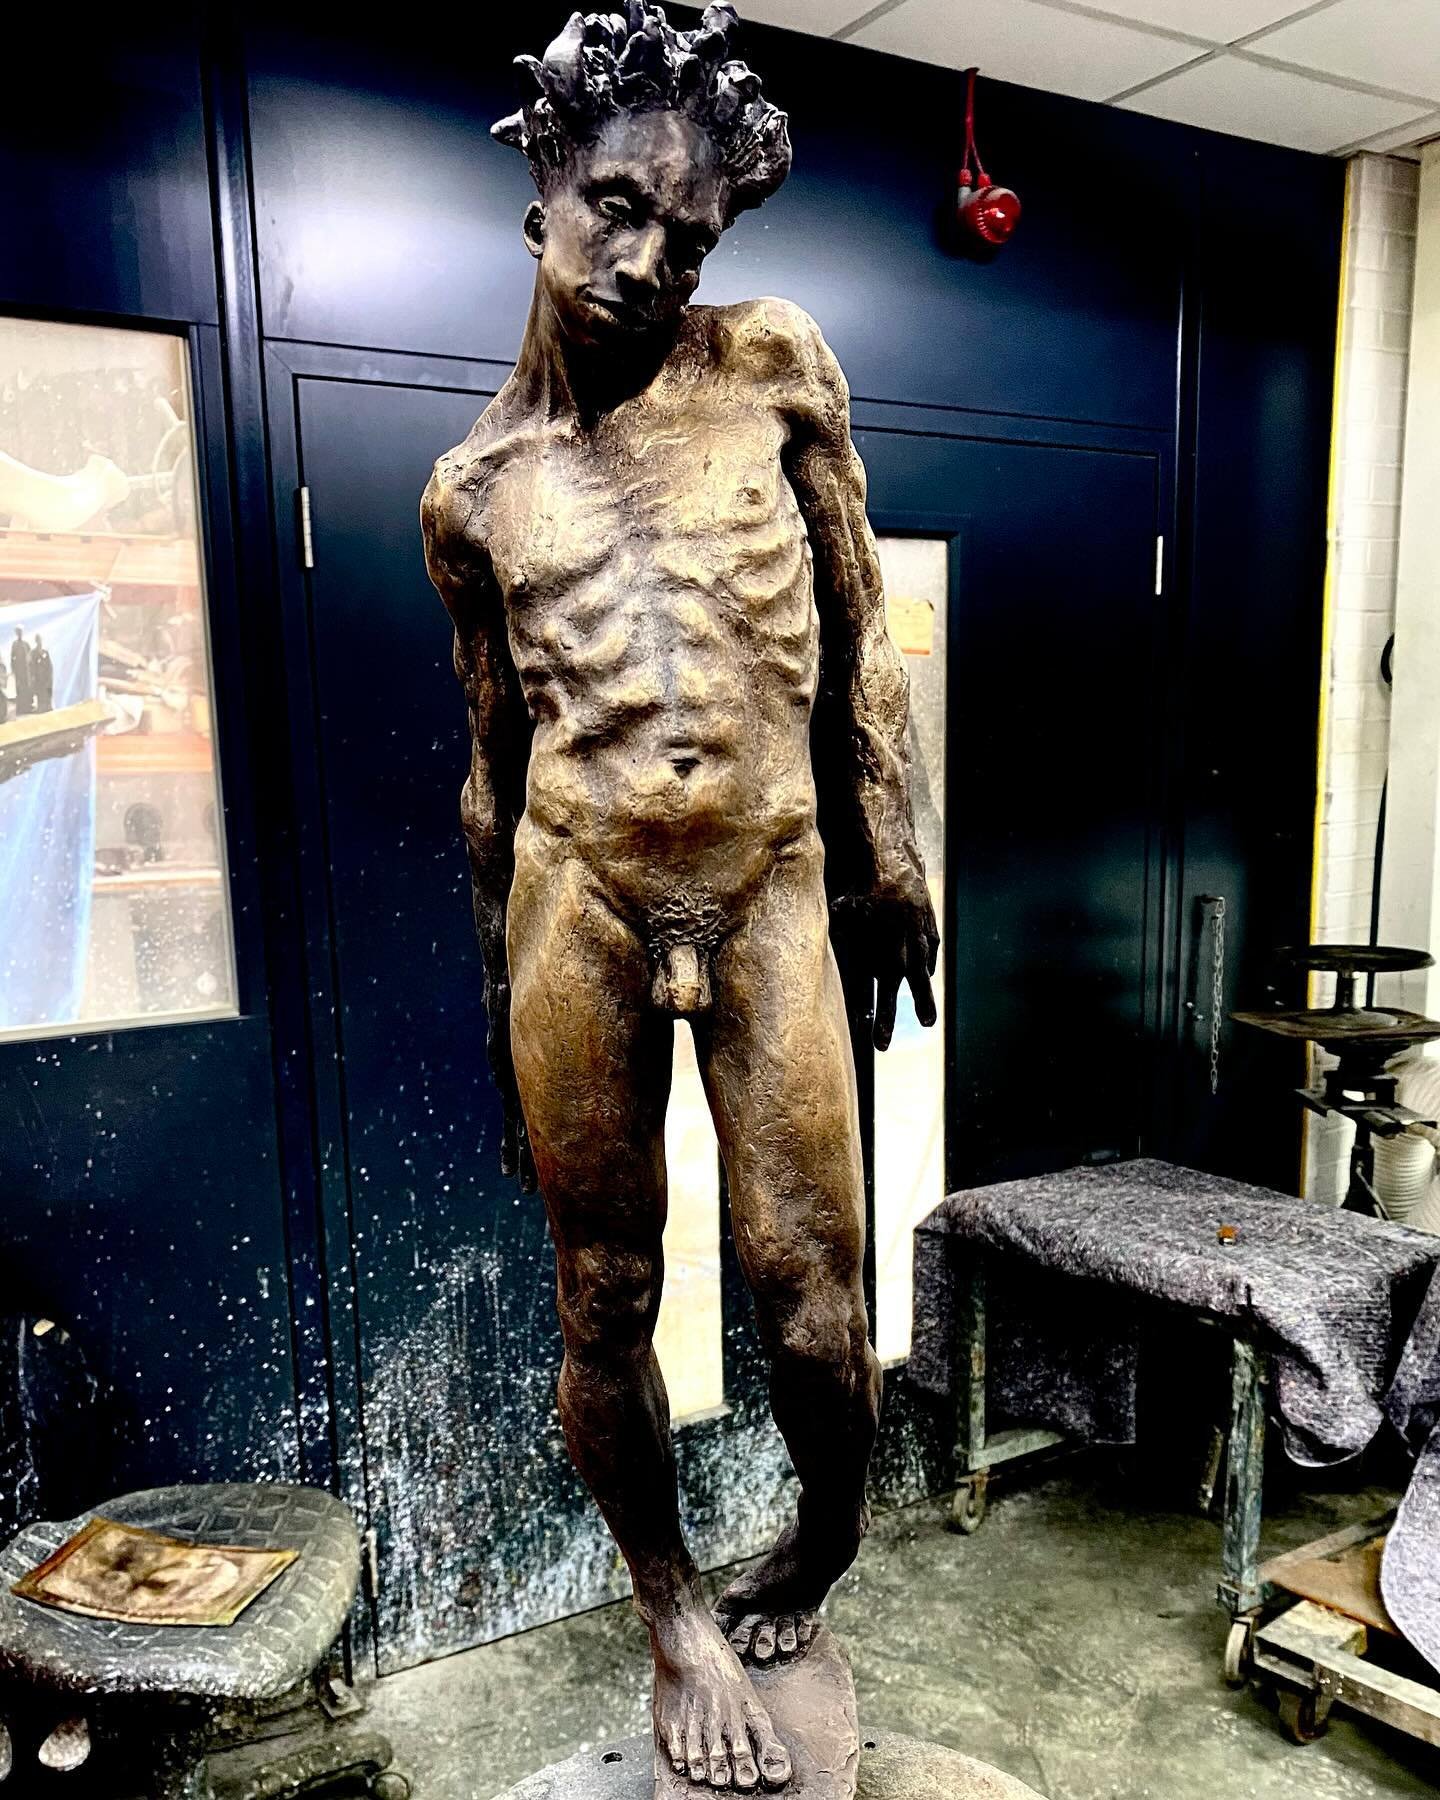 Patination in progress getting ready for the affordable art fair on hamster starting on the 8th-12th May message me for tickets x
#aaf #affordableartfair #hampstead #londonartfair #bronzesculpture